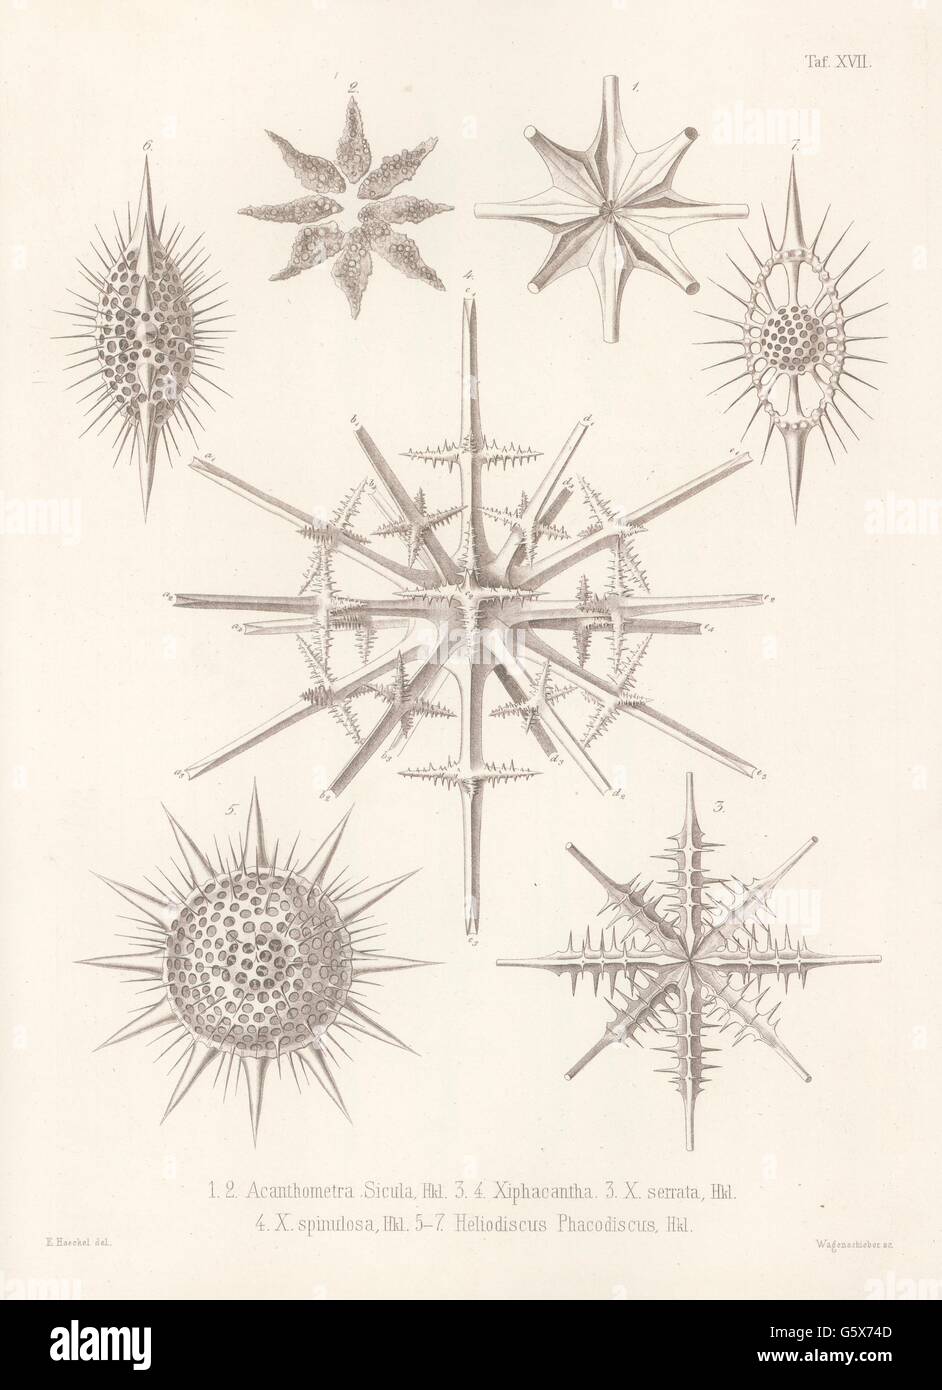 zoology / animals, radiolarian (Radiolaria), 1-2 Acanthpmetra sicula, 3 Xiphacantha serrata, 4 Xipacantha spinulosa, 5-7 Heliodiscus phacodiscus, colour lithograph, out of: Ernst Haeckel, 'Die Radiolarien (Rhizopeda radiata)', volume 2, Berlin, 1862, Additional-Rights-Clearences-Not Available Stock Photo